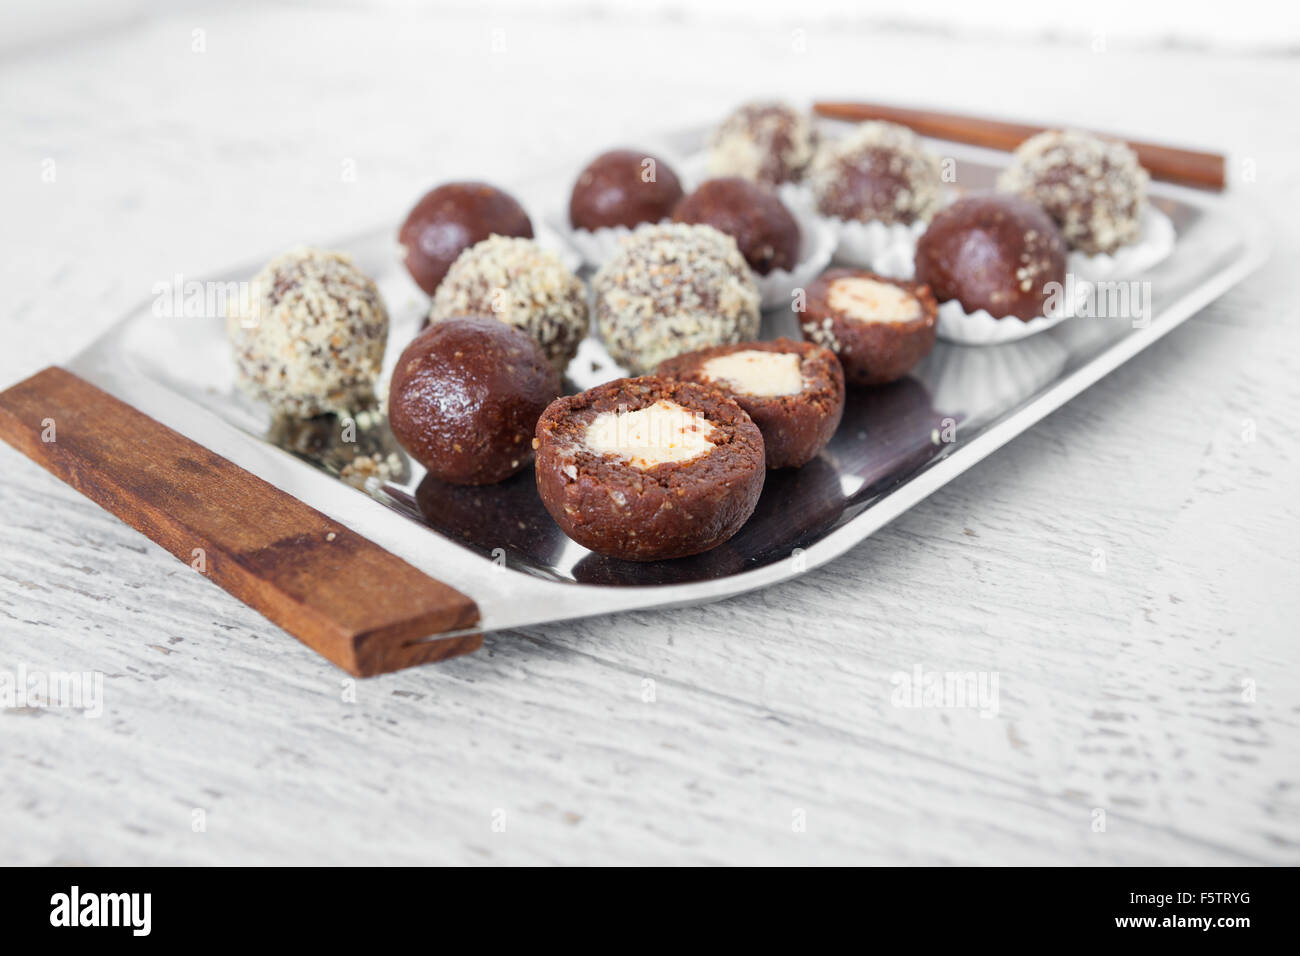 Chocolate ball with topping Stock Photo